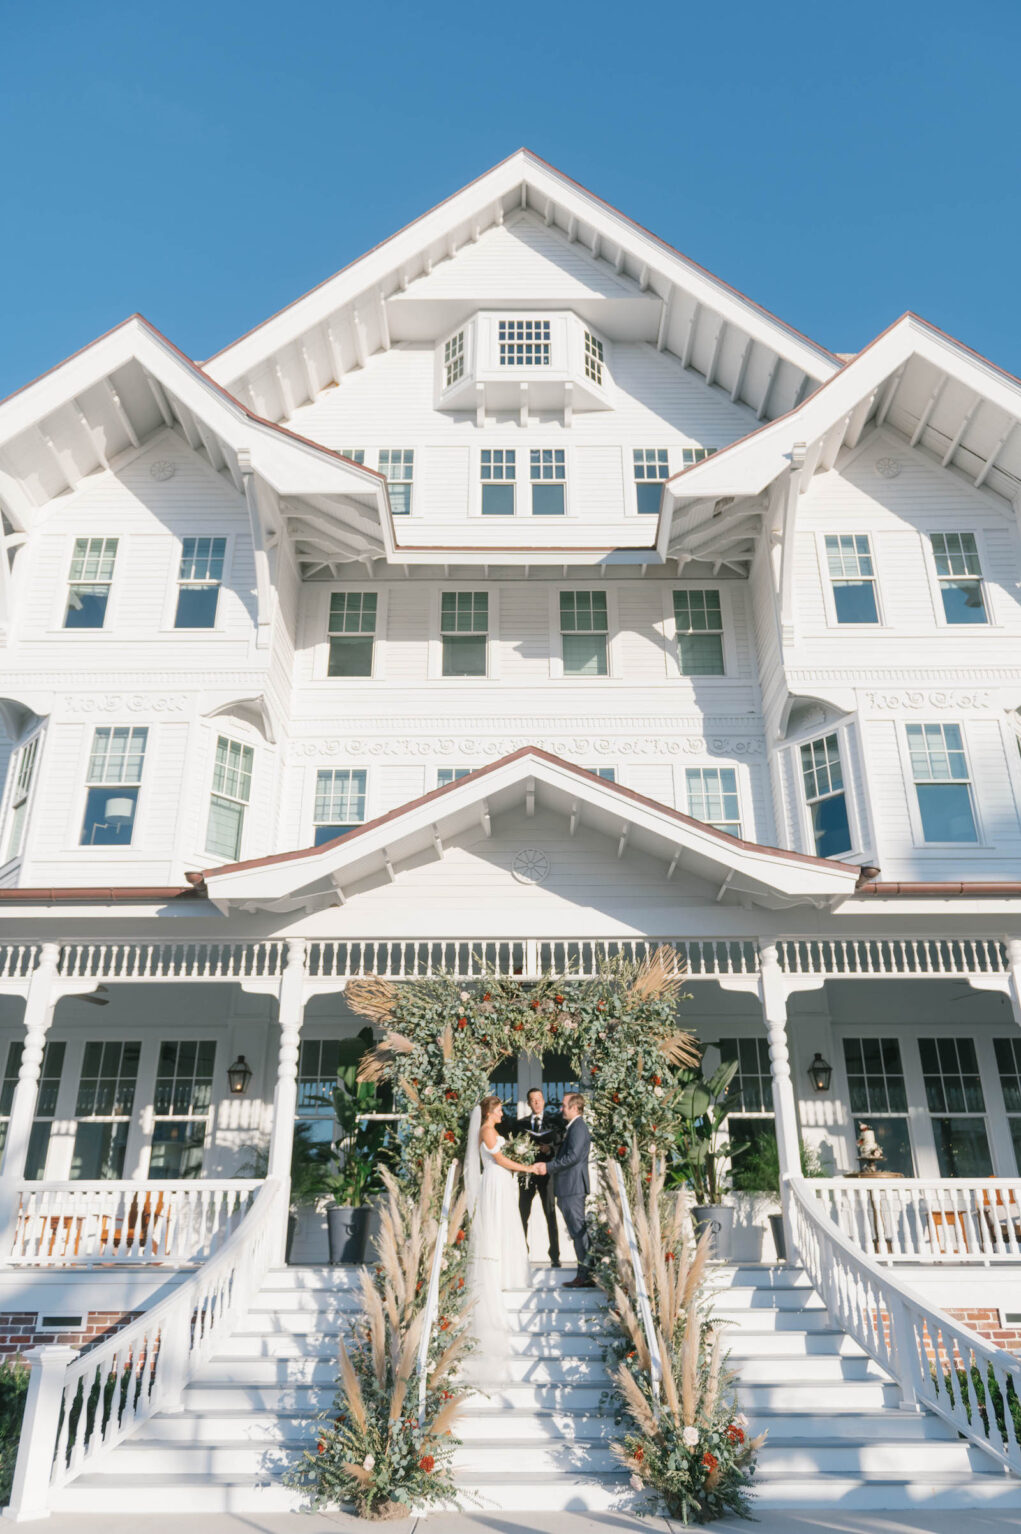 Boho Garden Wedding Ceremony, Bride and Groom Exchanging Wedding Vows Outside Florida Mansion Belleview Inn, Lounge Seating, Vintage Couches, Lush Greenery and Floral Arch with Pampas Grass Arrangements, String Lights | Tampa Bay Wedding Planner Parties A'la Carte